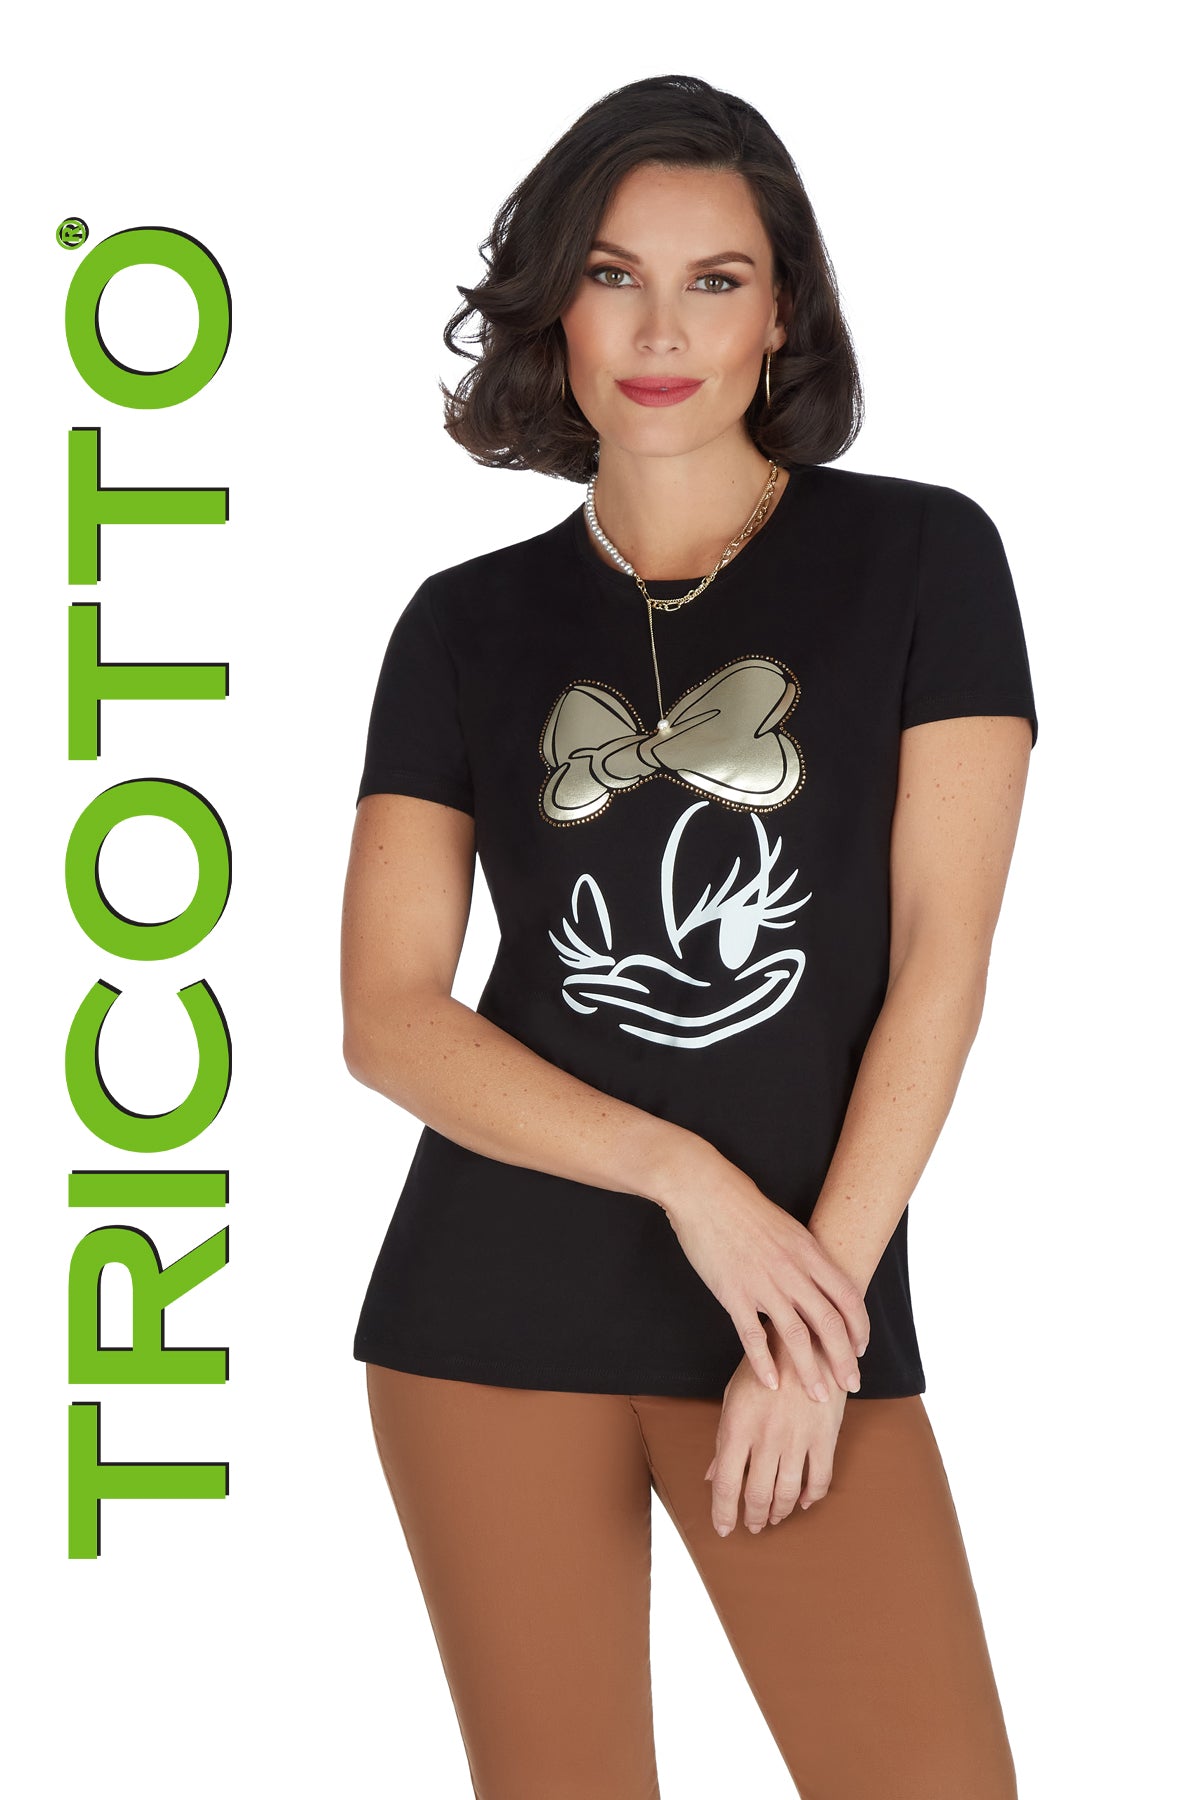 Tricotto Jeans-Tricotto Spring 2022-Tricotto Clothing-Tricotto T-shirts- Tricotto Online Shop – Marianne Style